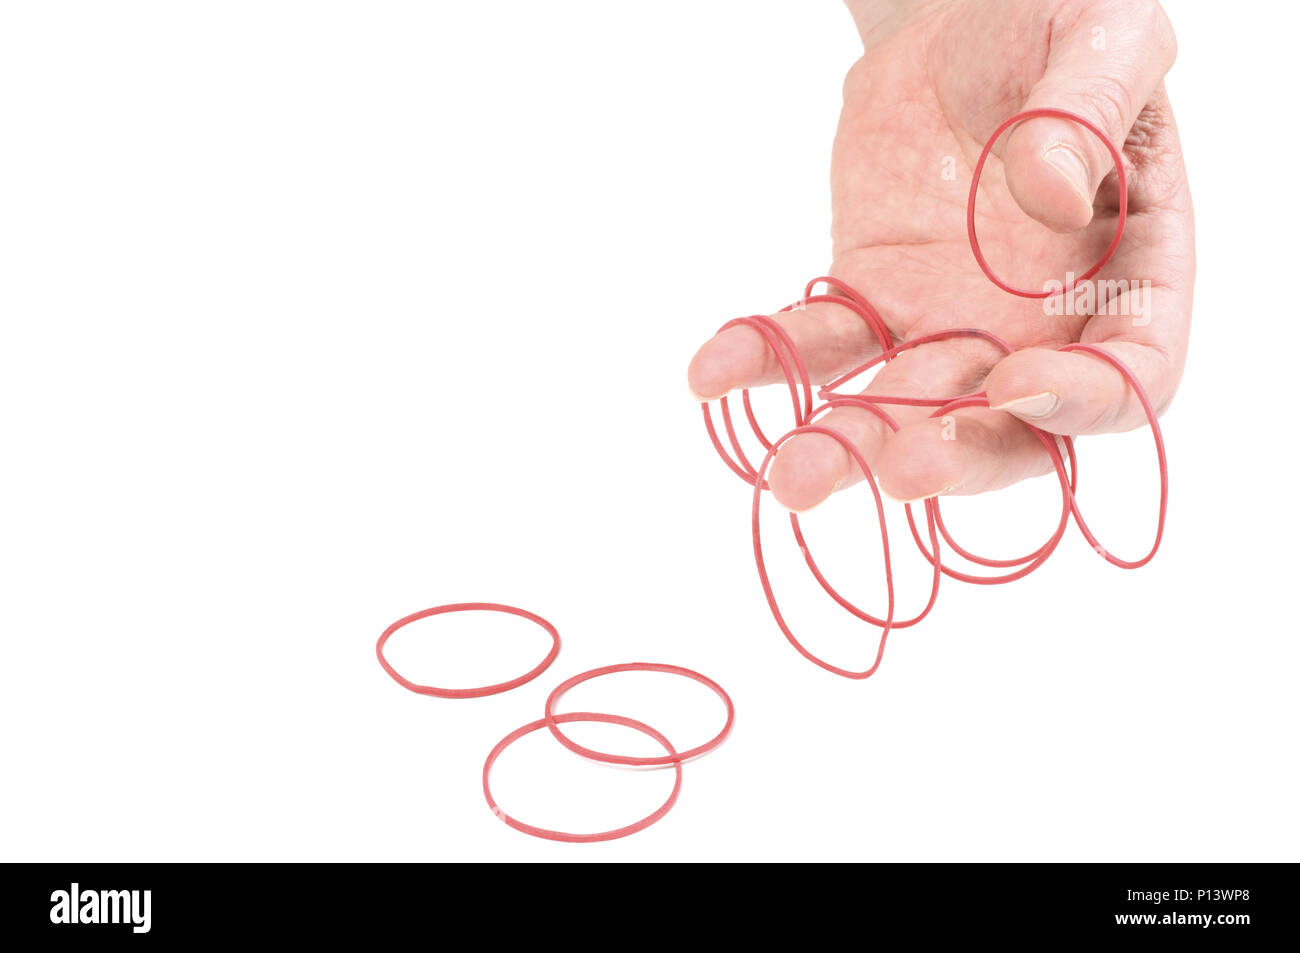 Rubber bands in human hand. Isolated on white background. Stock Photo